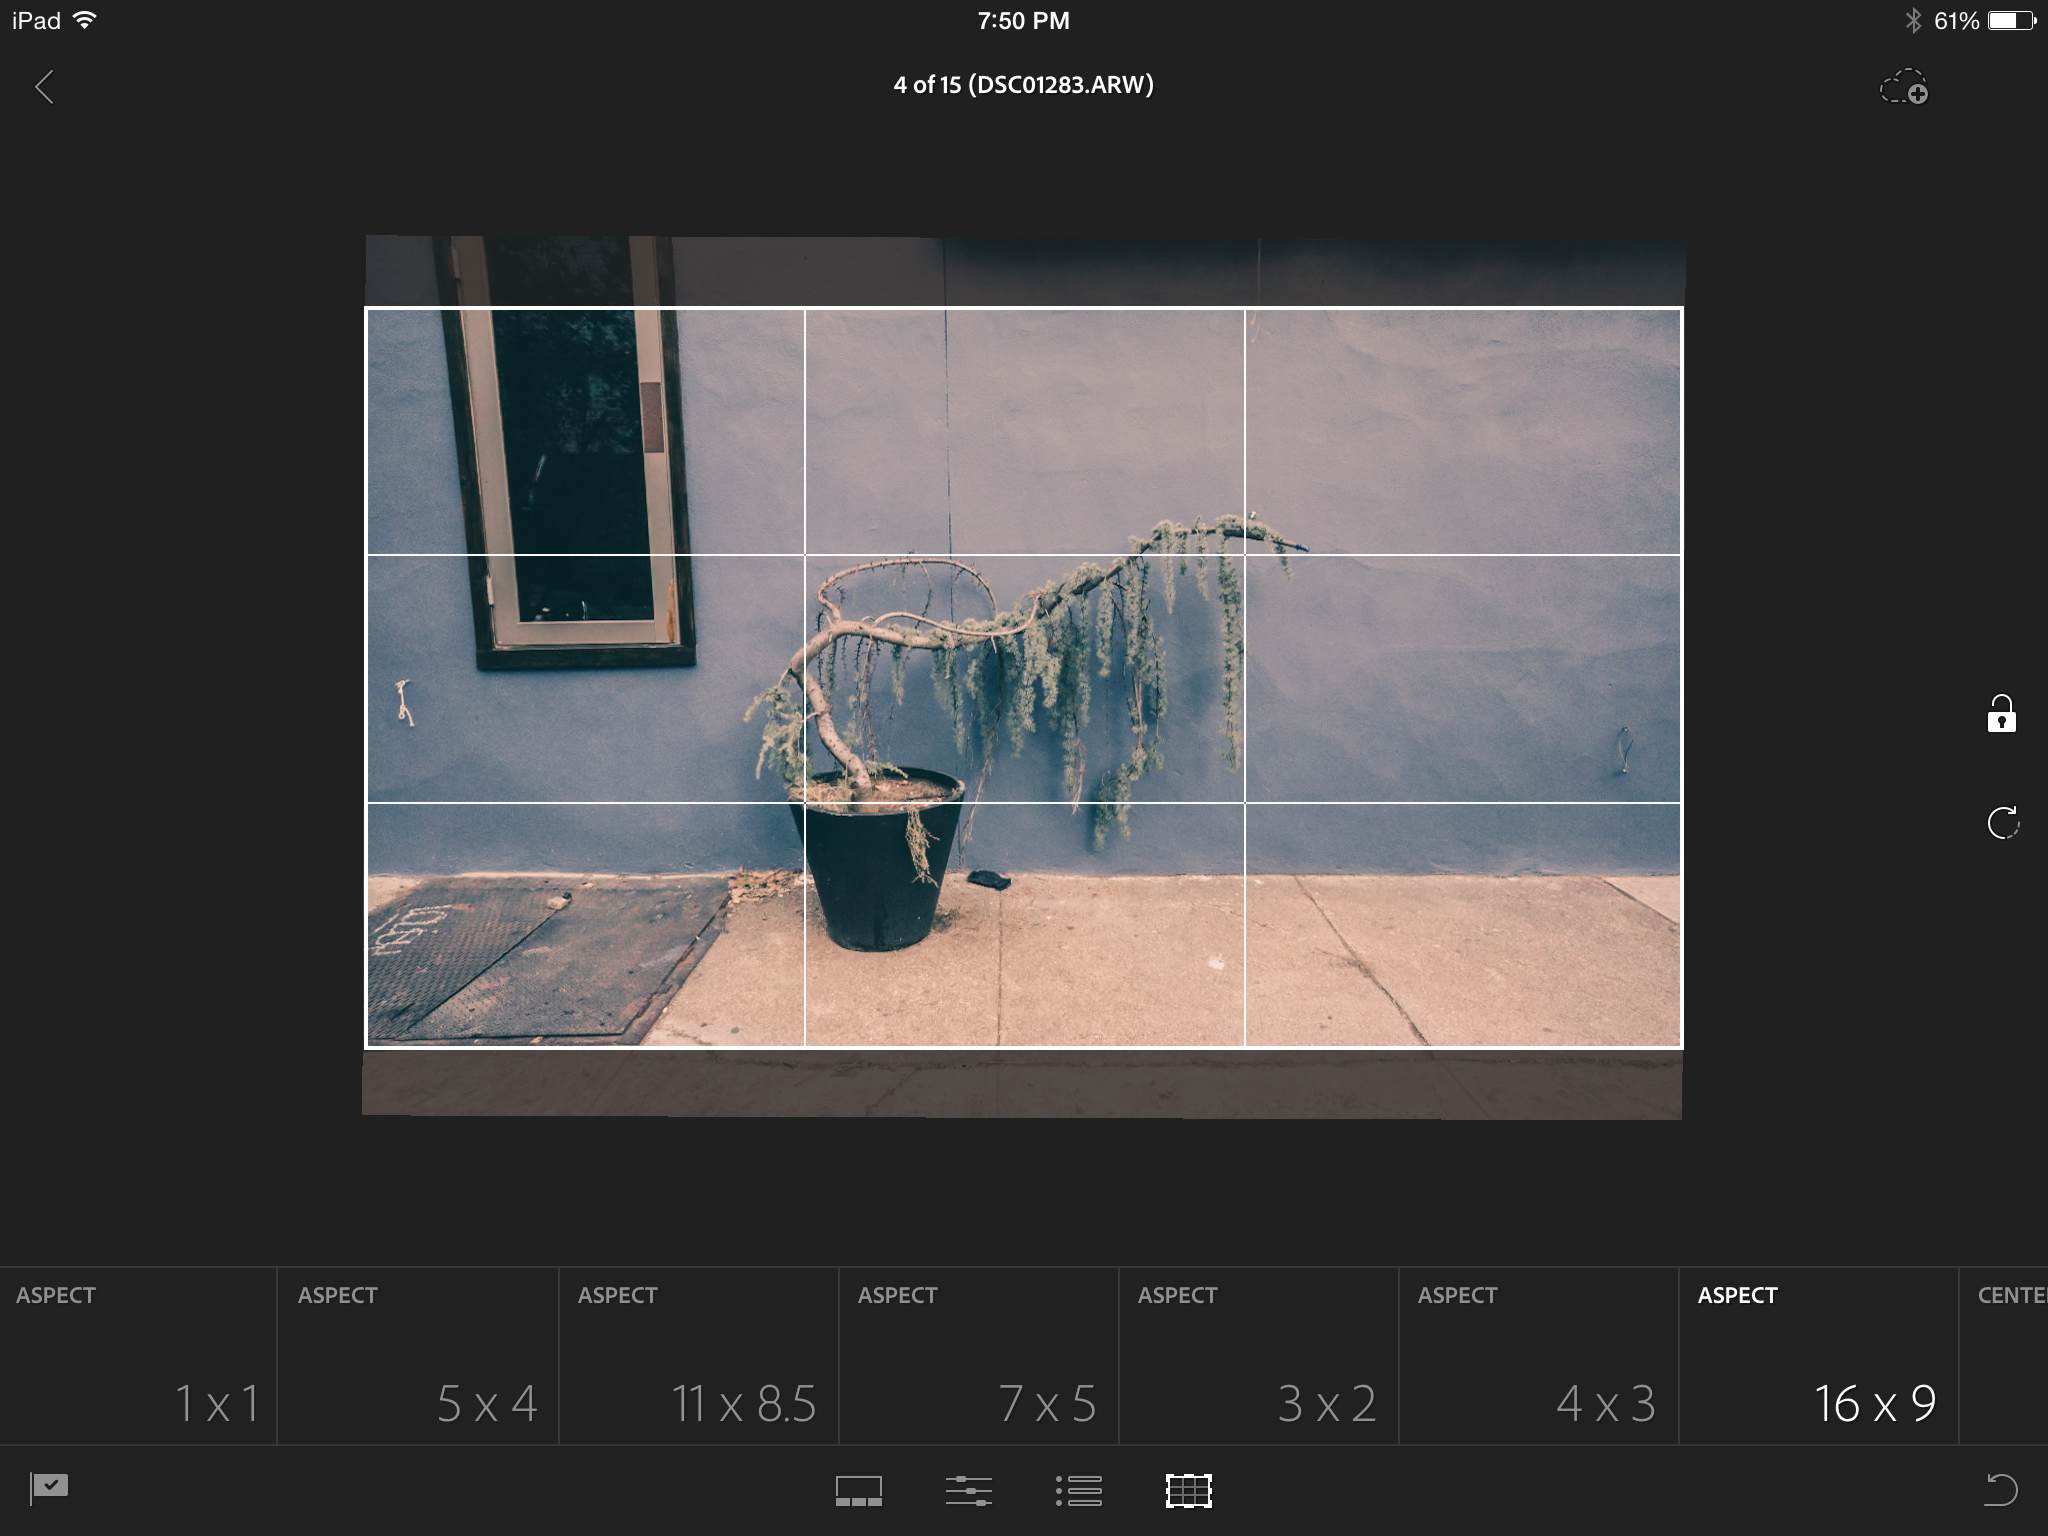 Adobe Lightroom Mobile Review: Edit RAW Photos On Your iPad, Sort Of